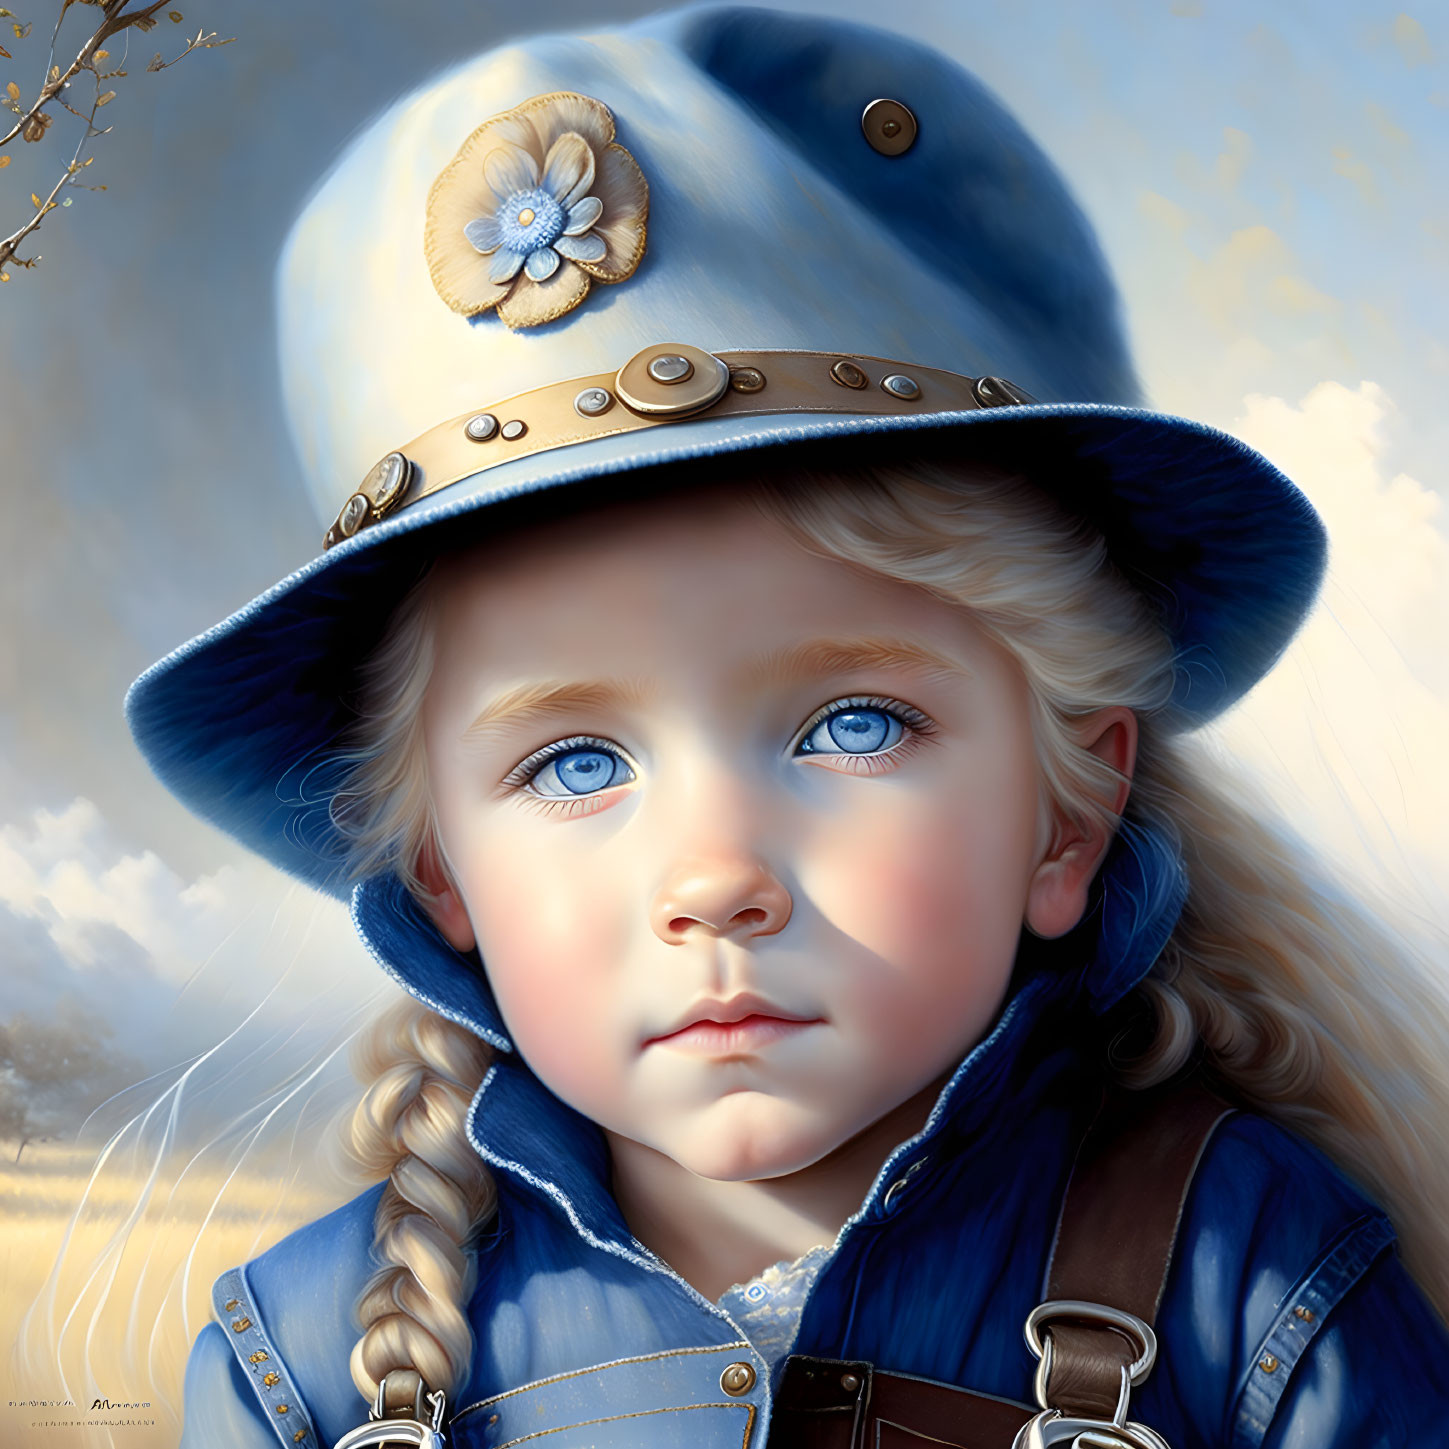 Young child with blue eyes and blonde braids in blue hat and coat, under sky and clouds.